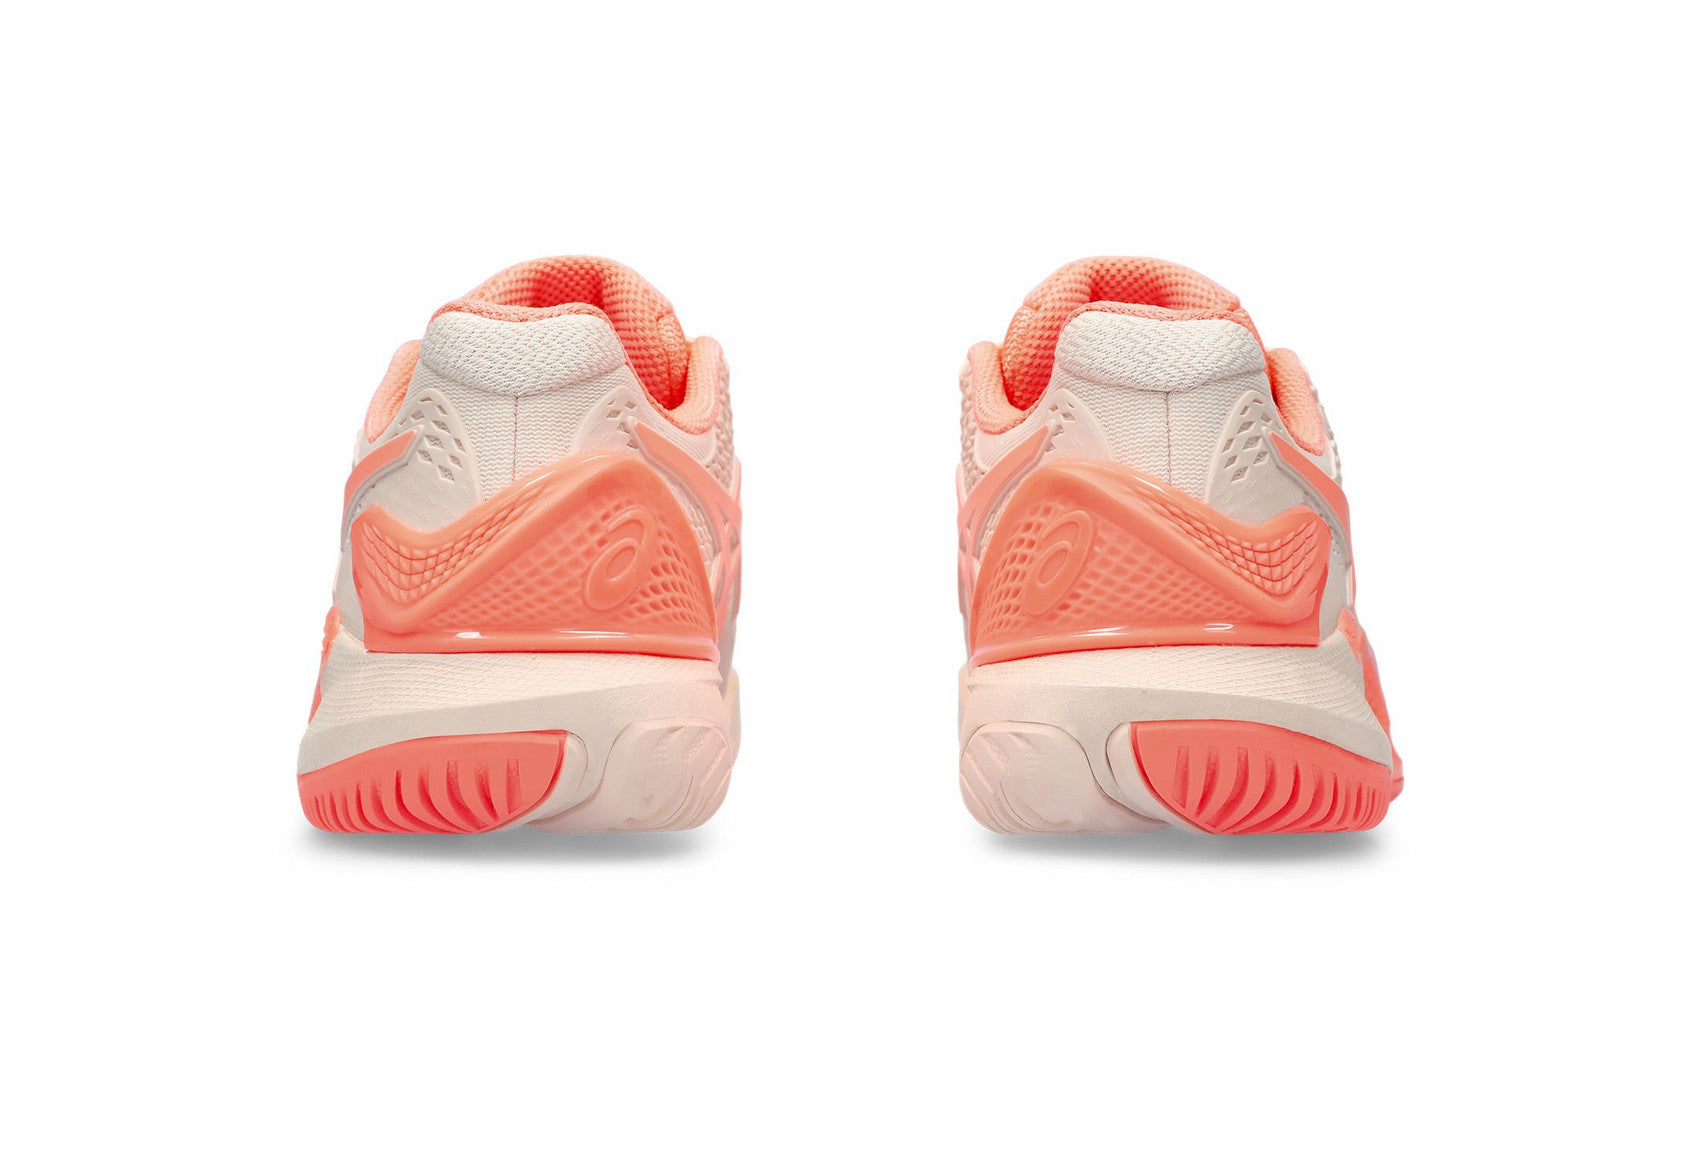 Asics Women's GEL-RESOLUTION 9 Tennis Shoes in Pearl Pink/Sun Coral